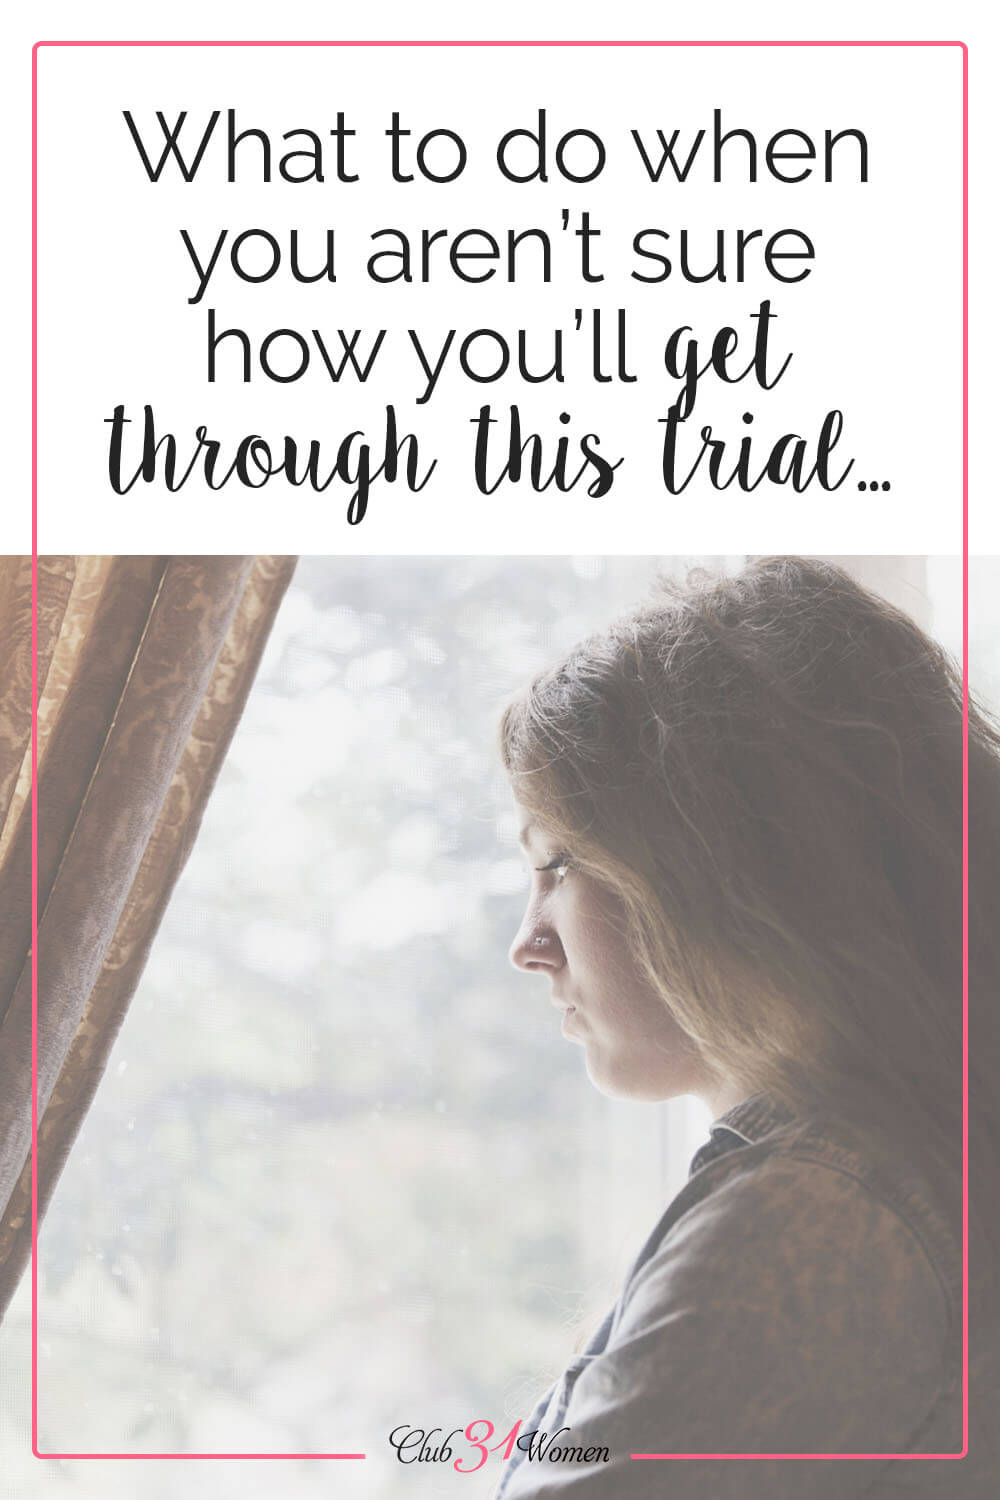 When you're stuck in the middle of the storm, it's hard to see how you'll get through and make it out. But God gives us hope! via @Club31Women